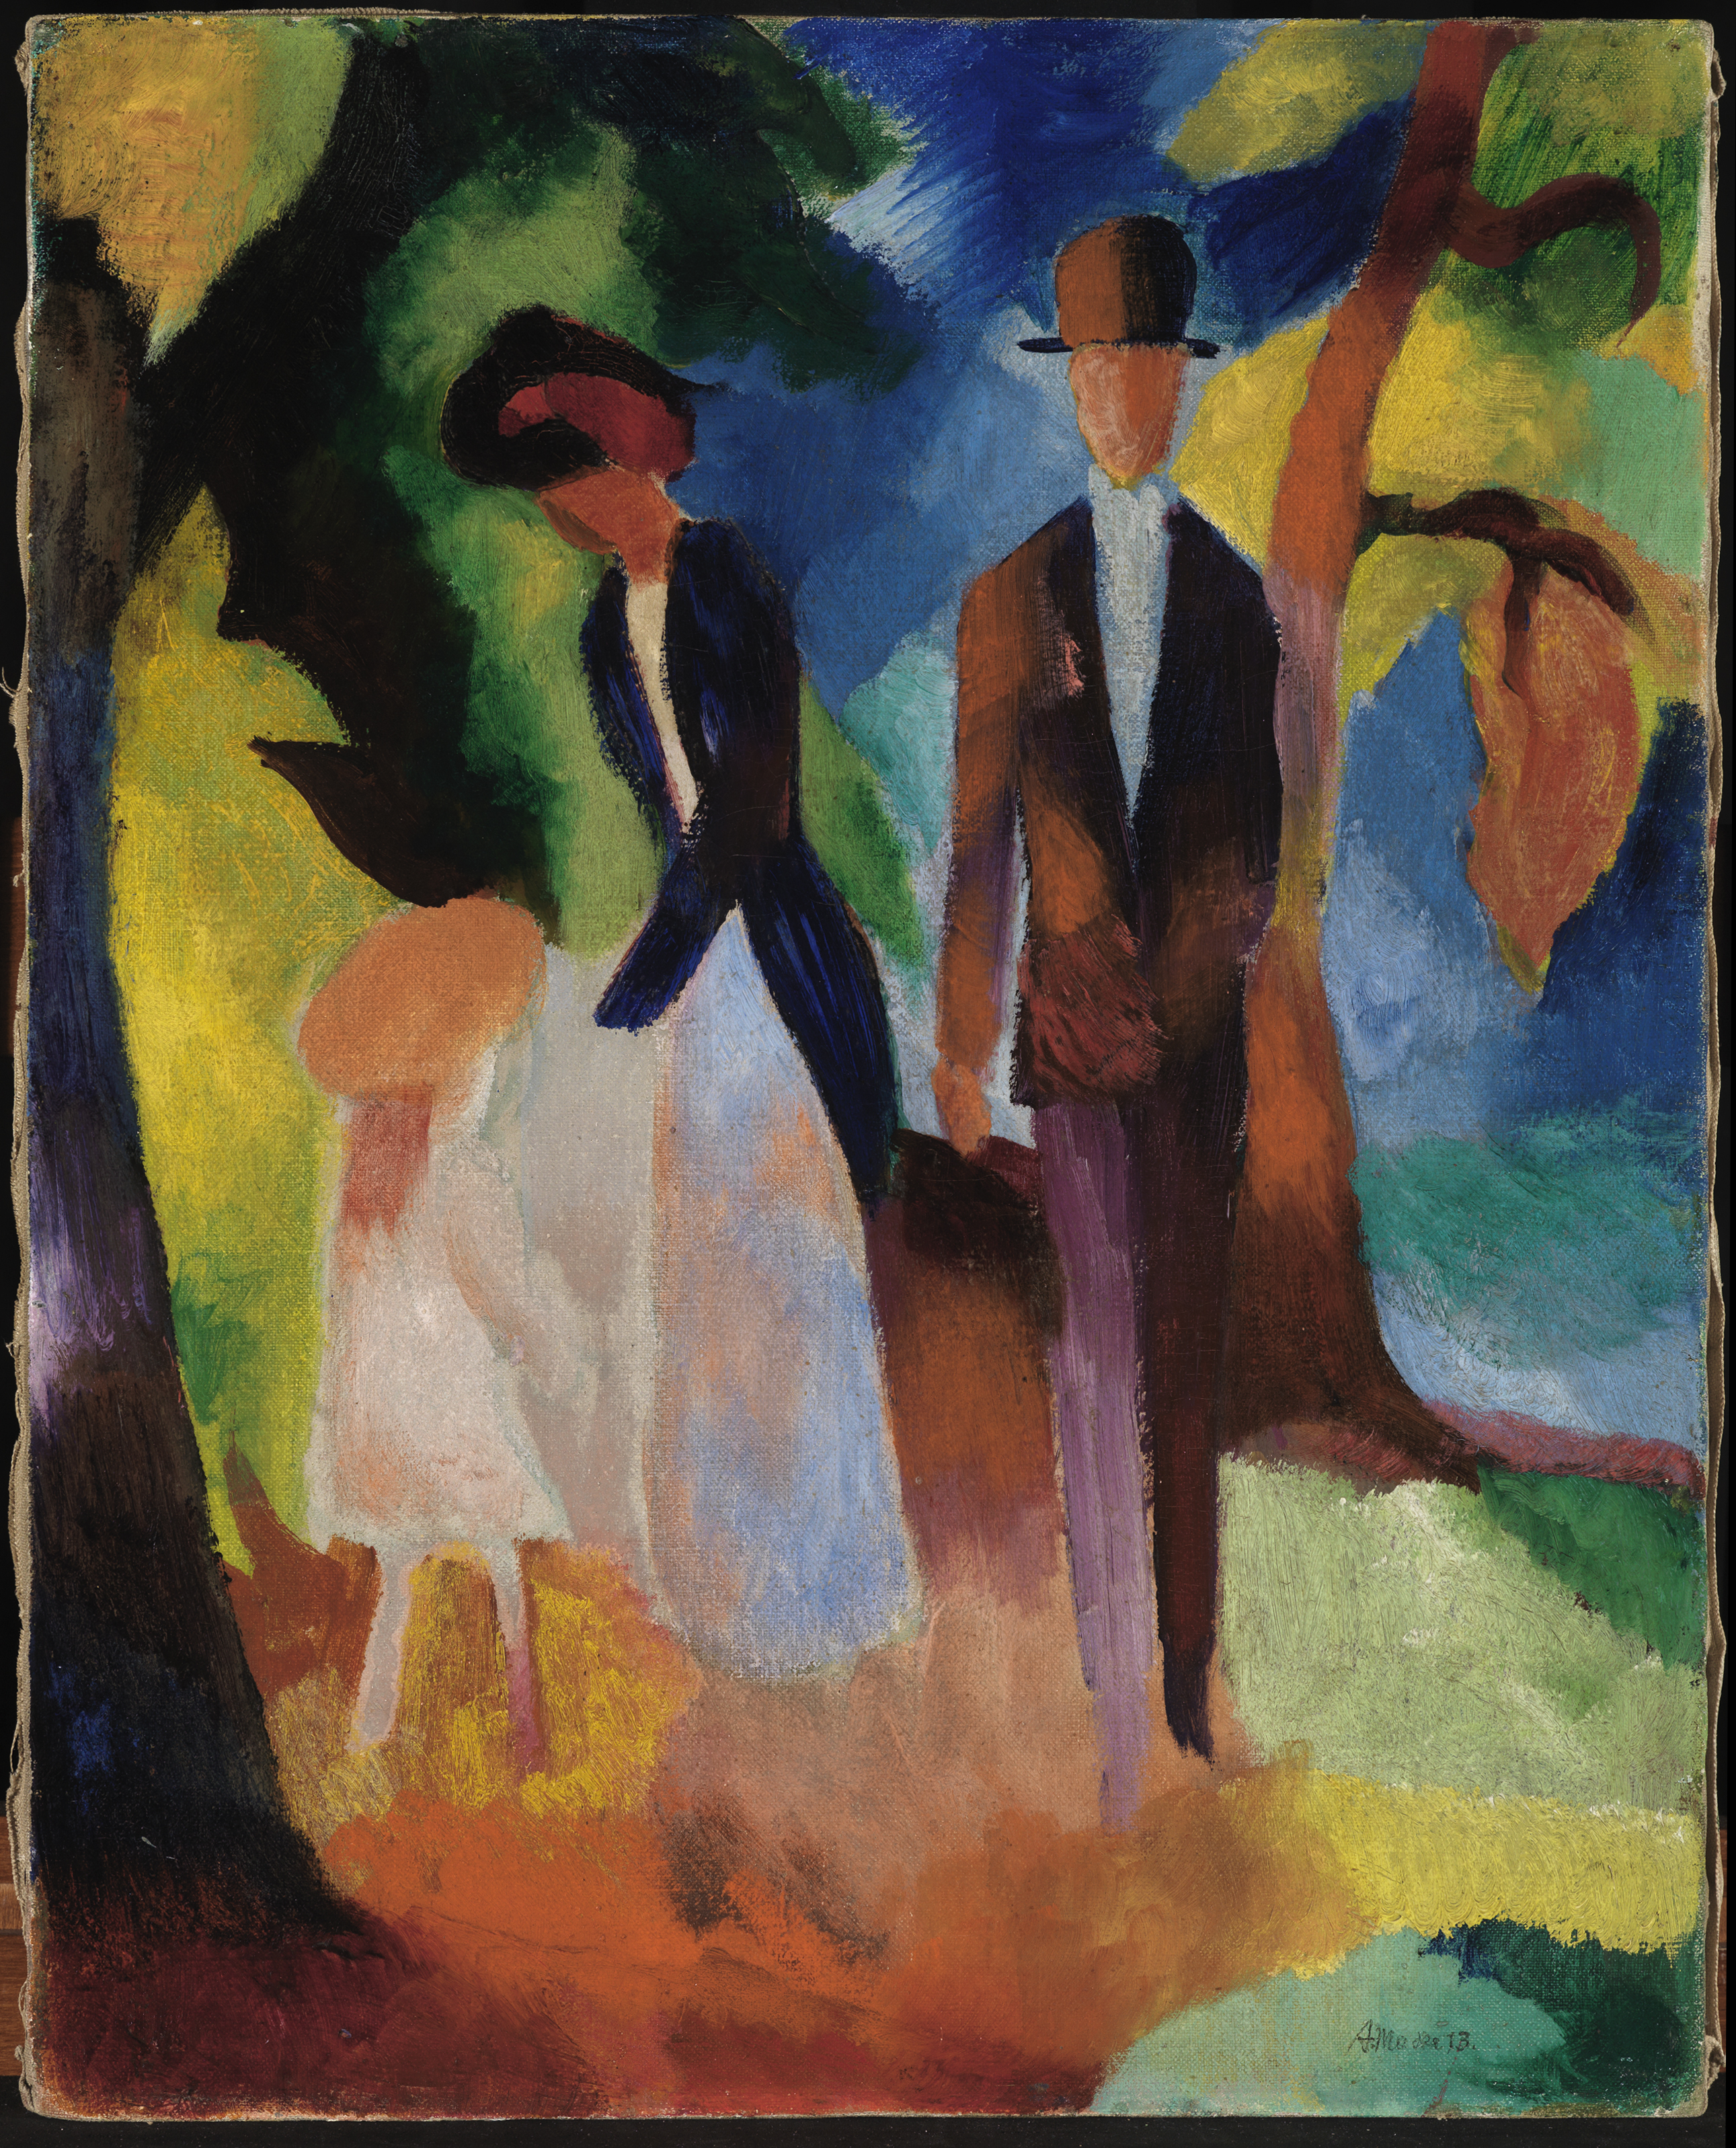 People by the Blue Lake by August Macke - 1913 Staatliche Kunsthalle Karlsruhe